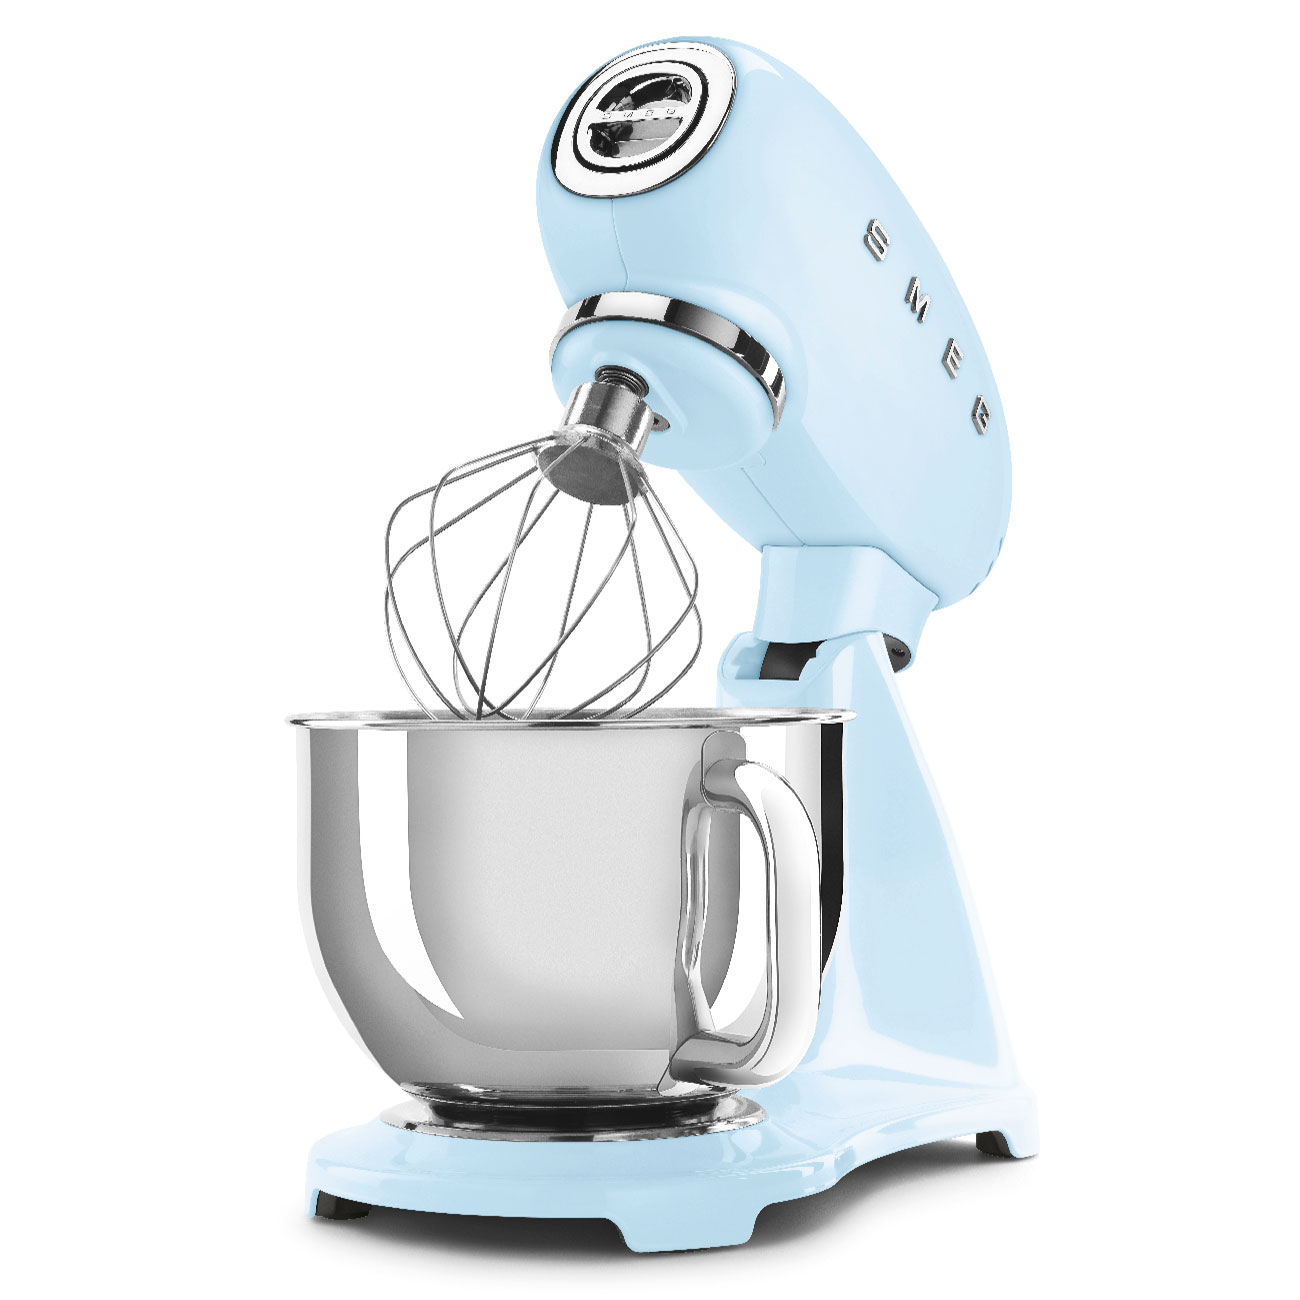 Pastel Blue Food Mixer with 4.8l stainless steel bowl - SMF03PBUK_2